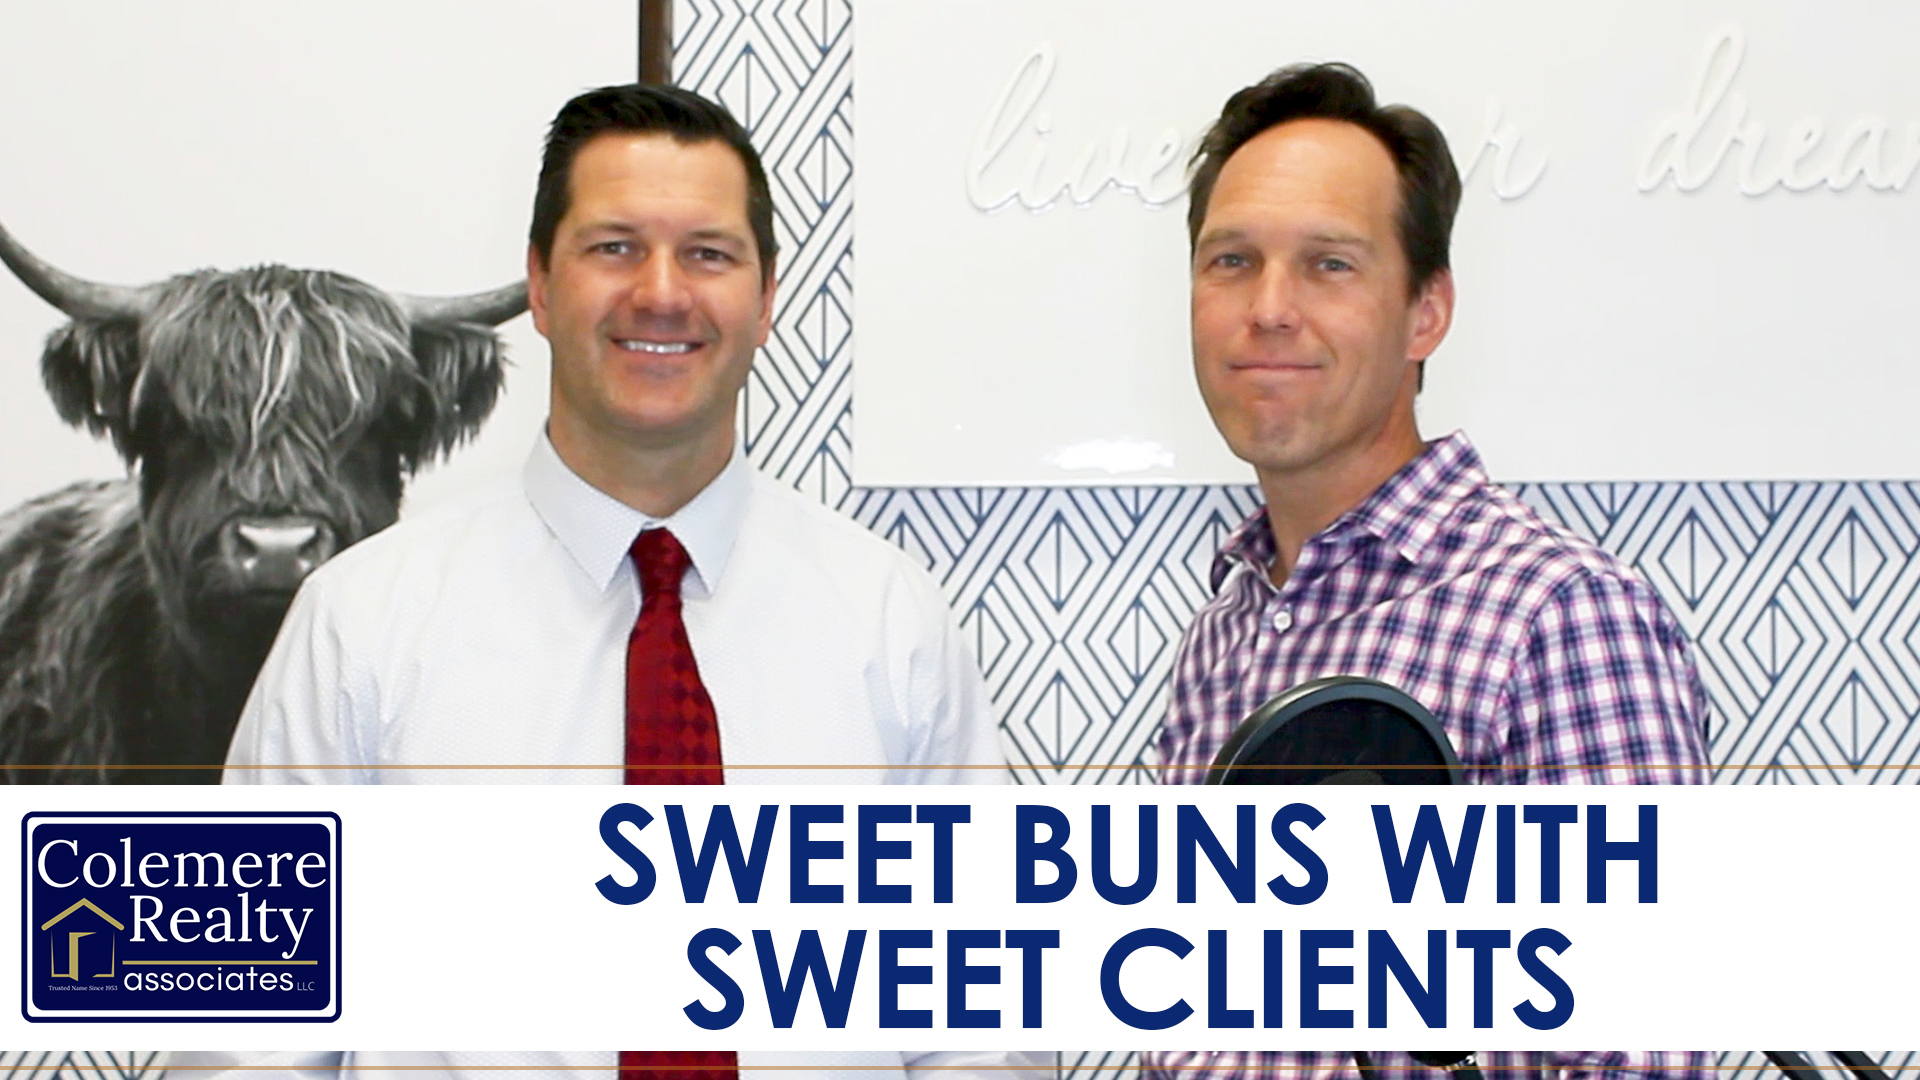 Sweet Buns For Sweet Clients March 25 & 26, 2-6